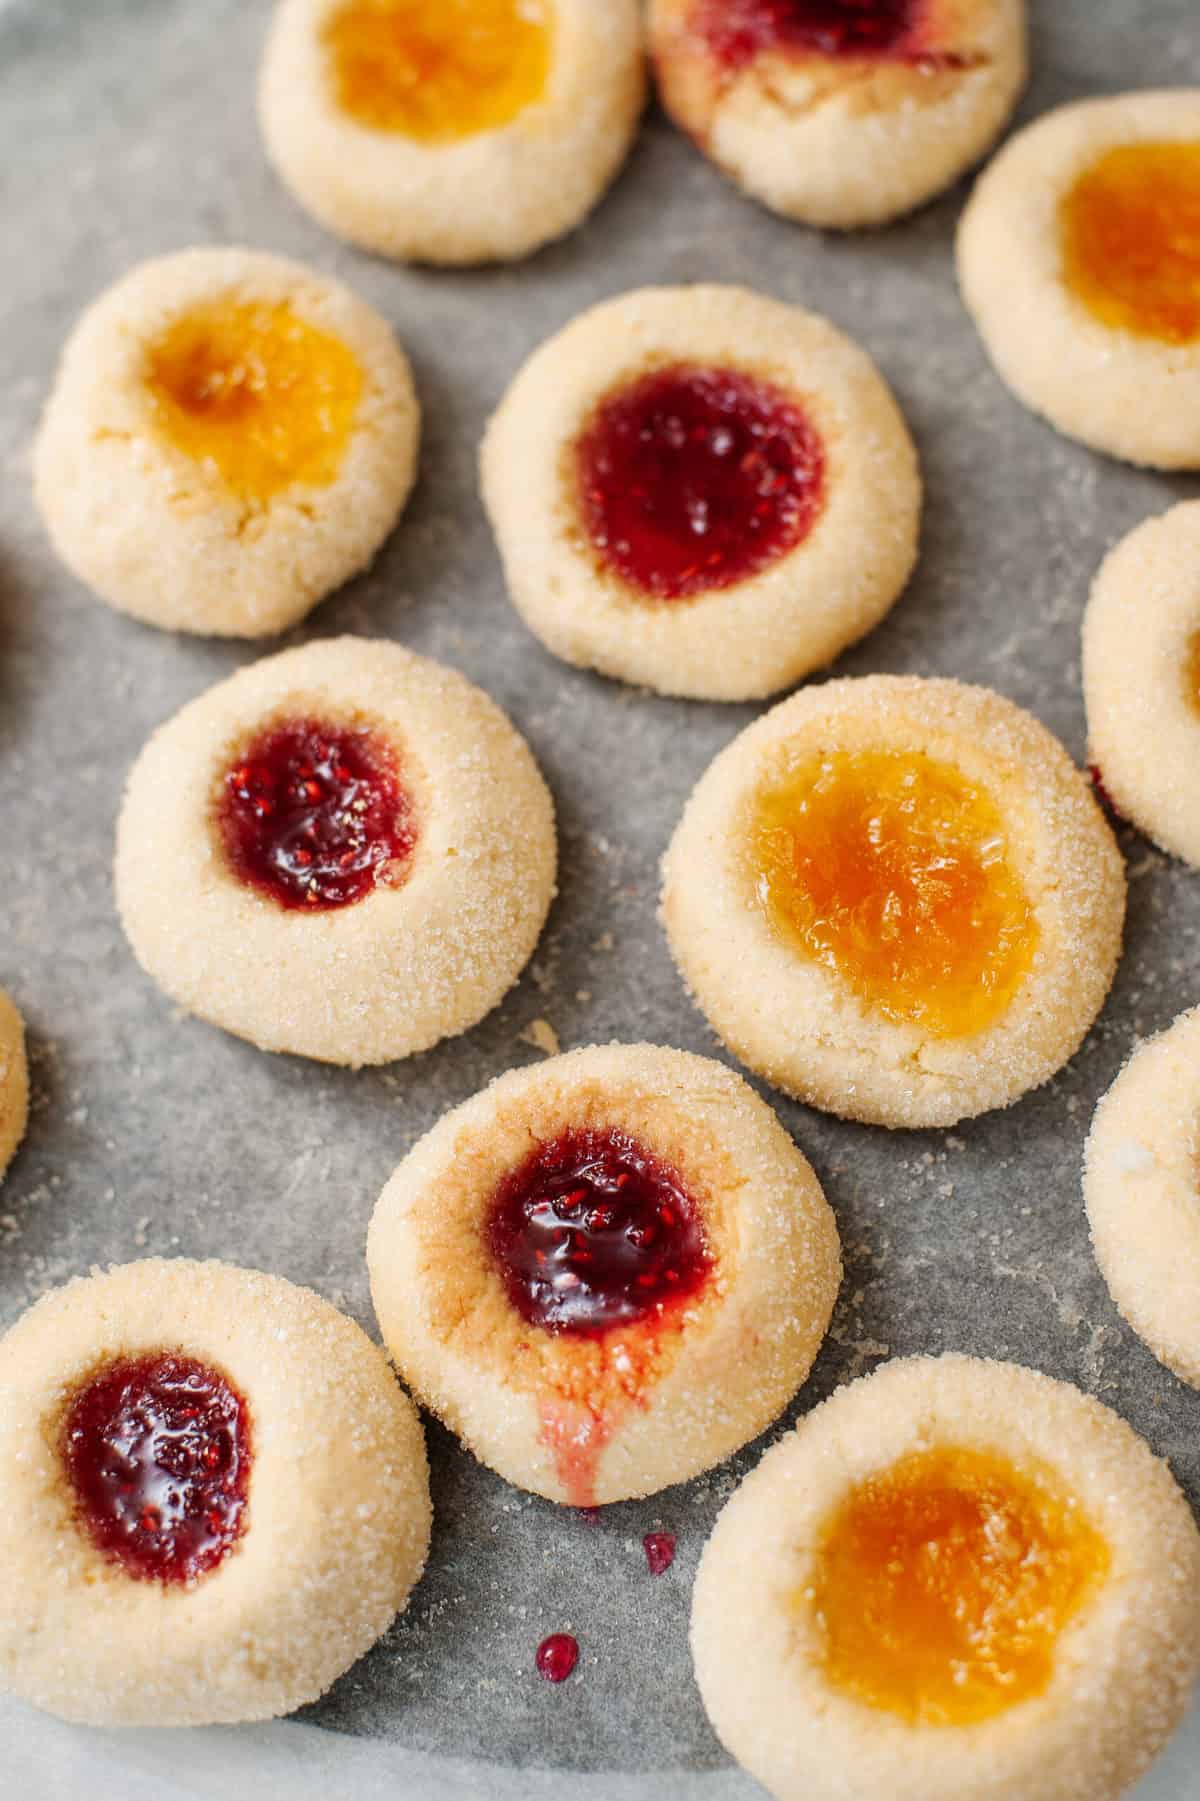 thumbprint cookies on parchment paper